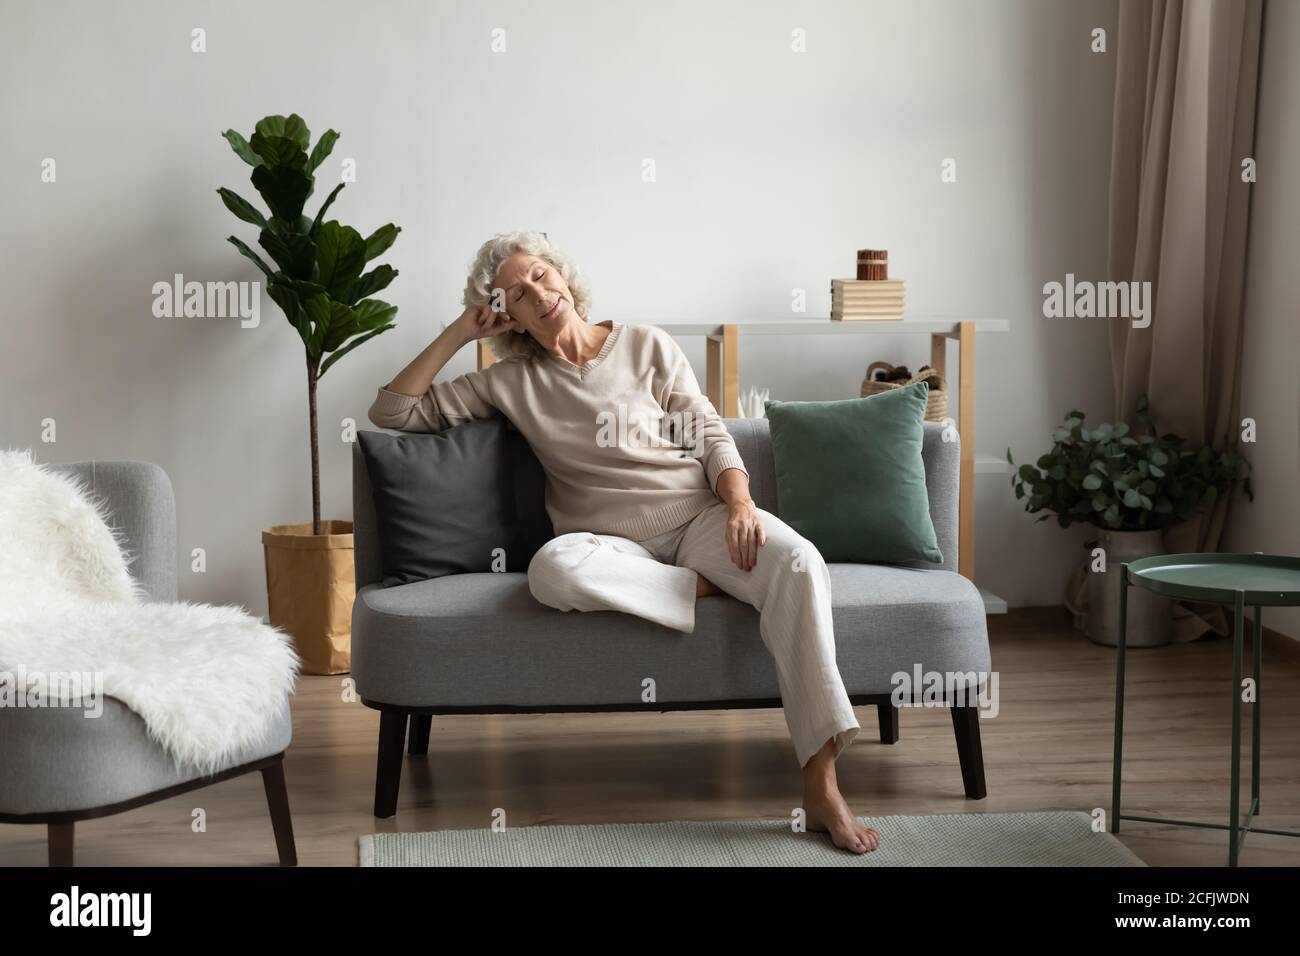 Calm mature woman sitting, relaxing on cozy couch at home Stock Photo